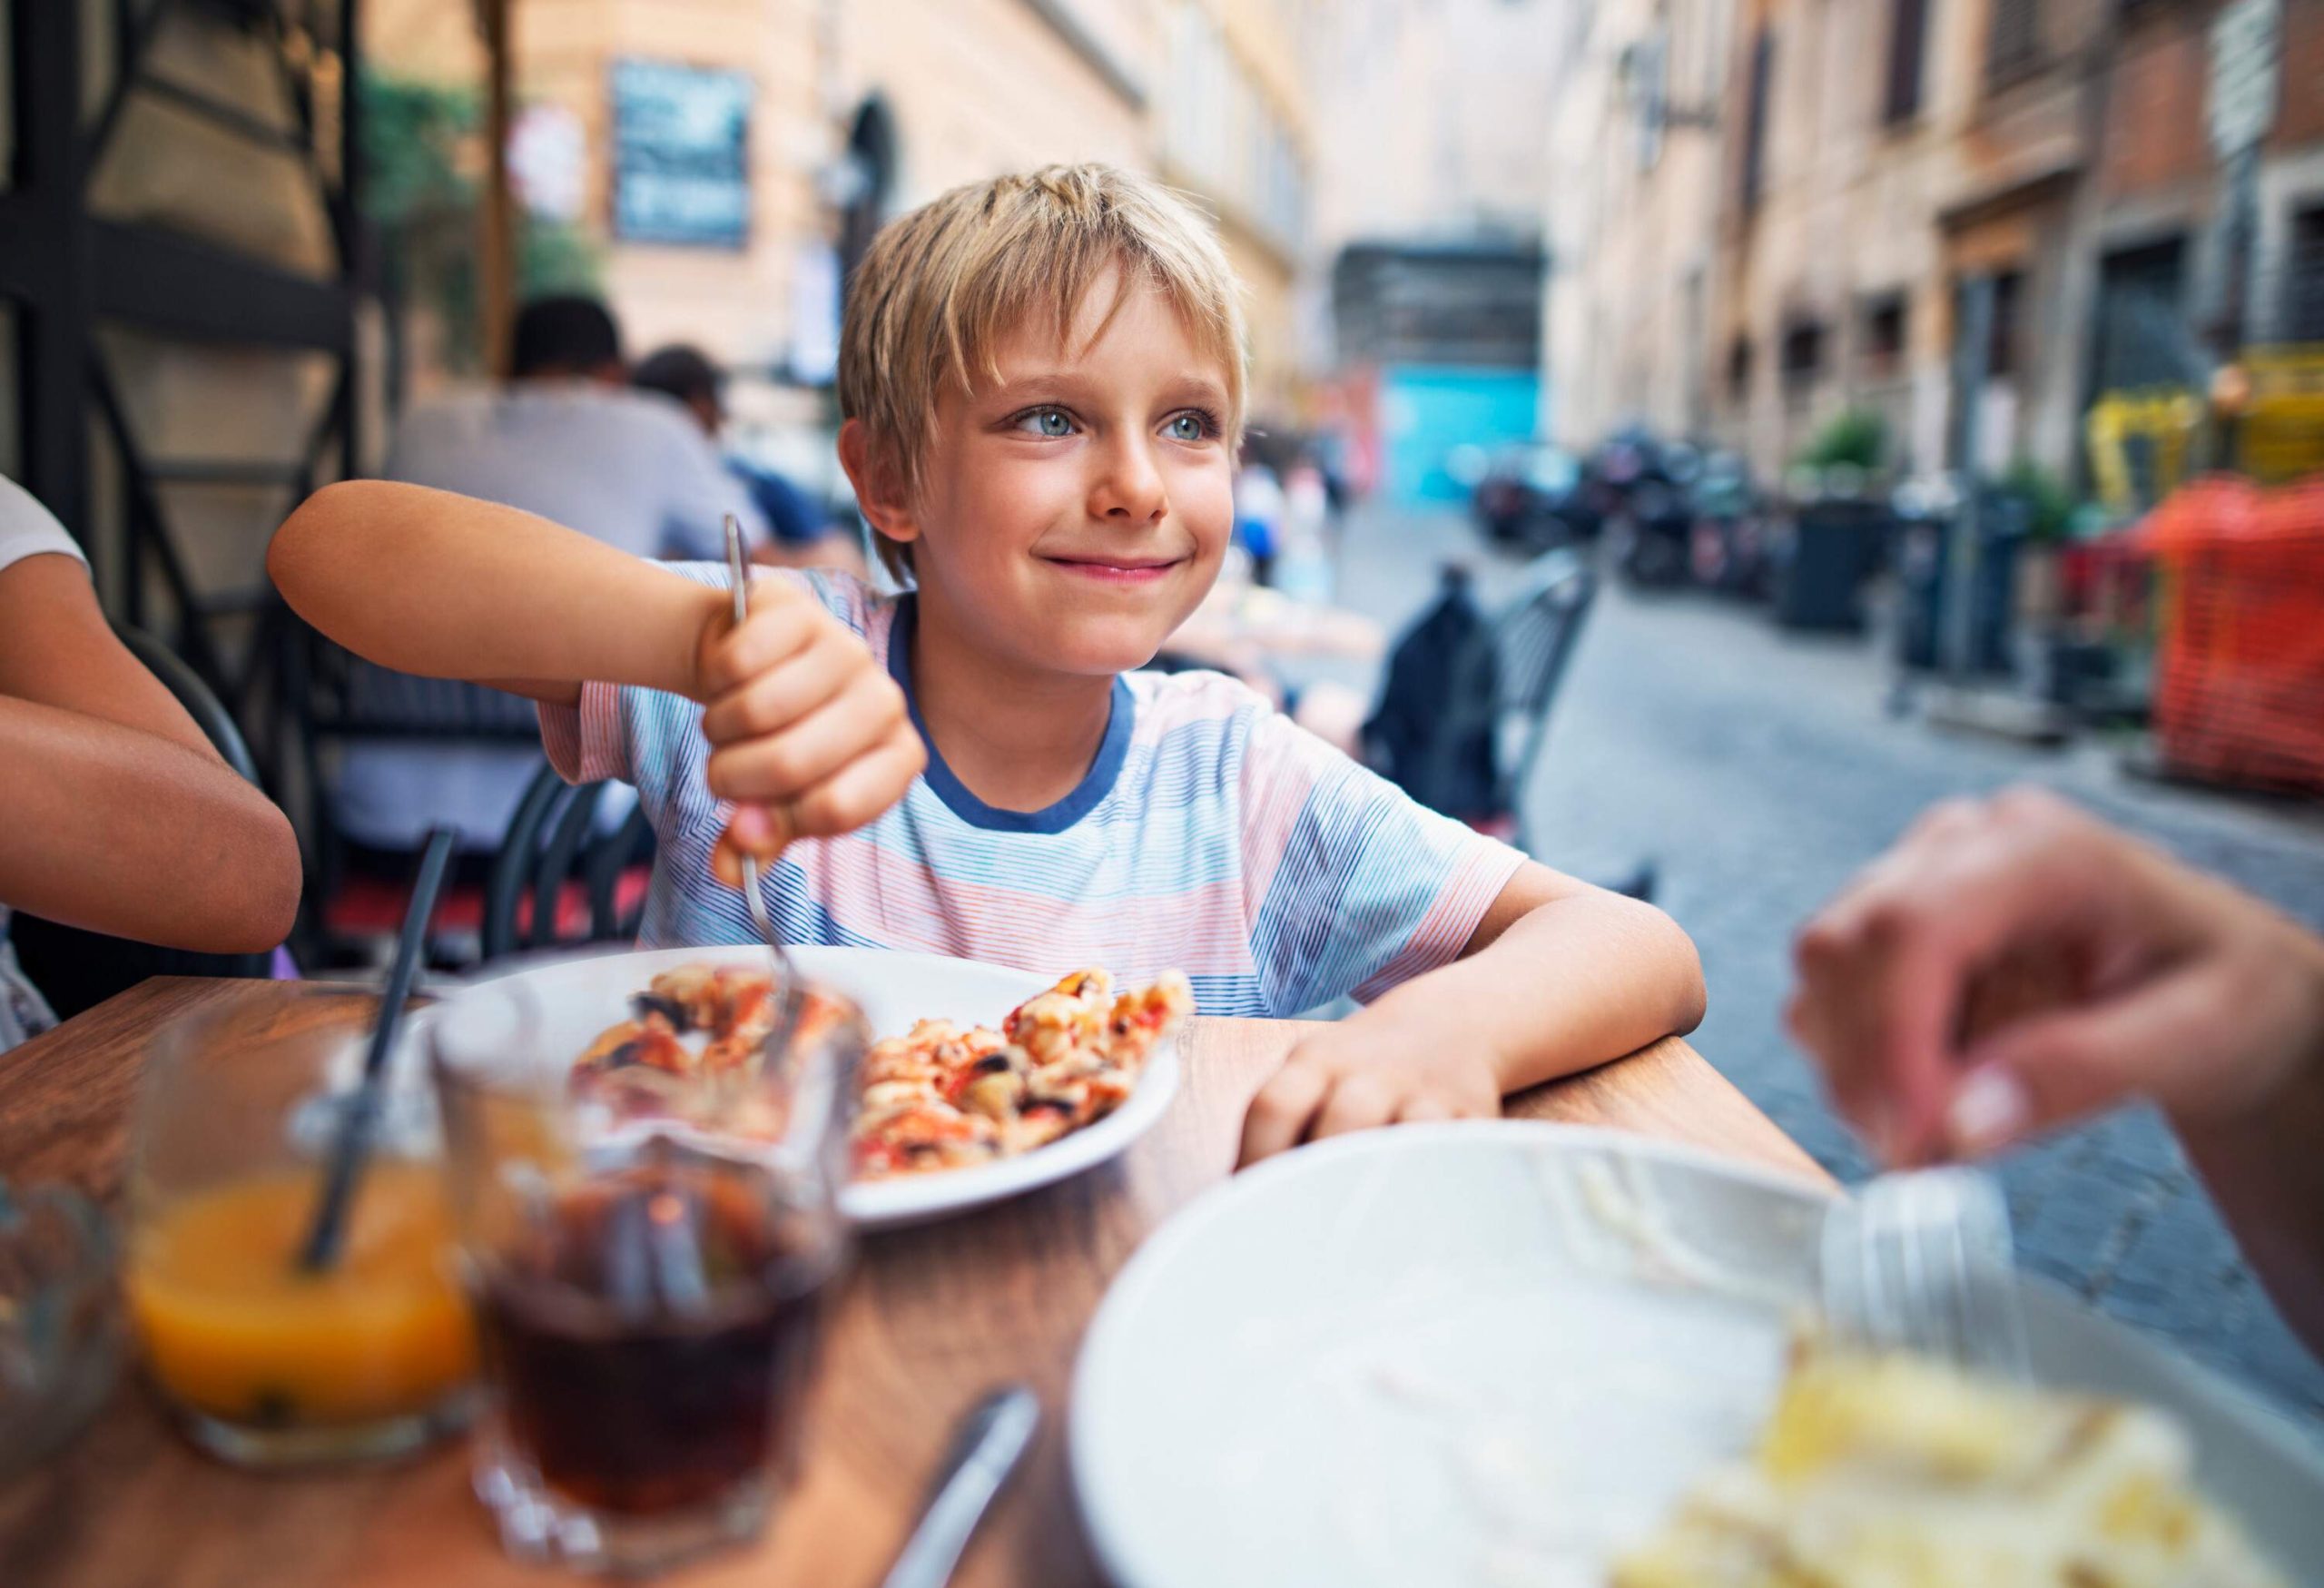 A young boy with blonde hair eating pizza with a fork at an outdoor restaurant.